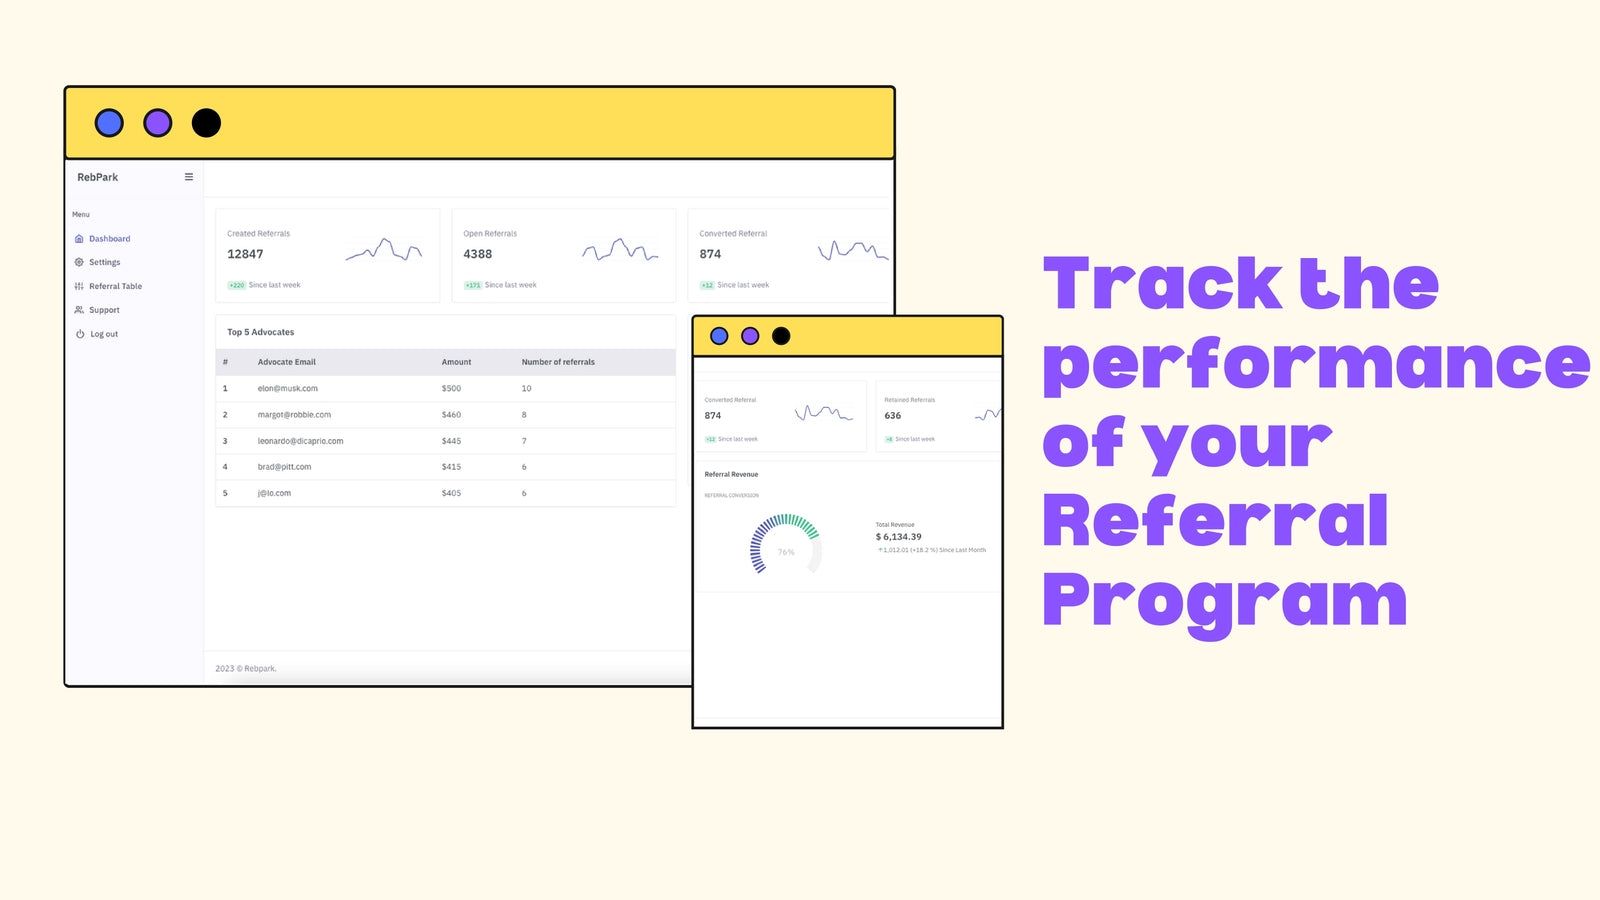 Track the performance of your referral program